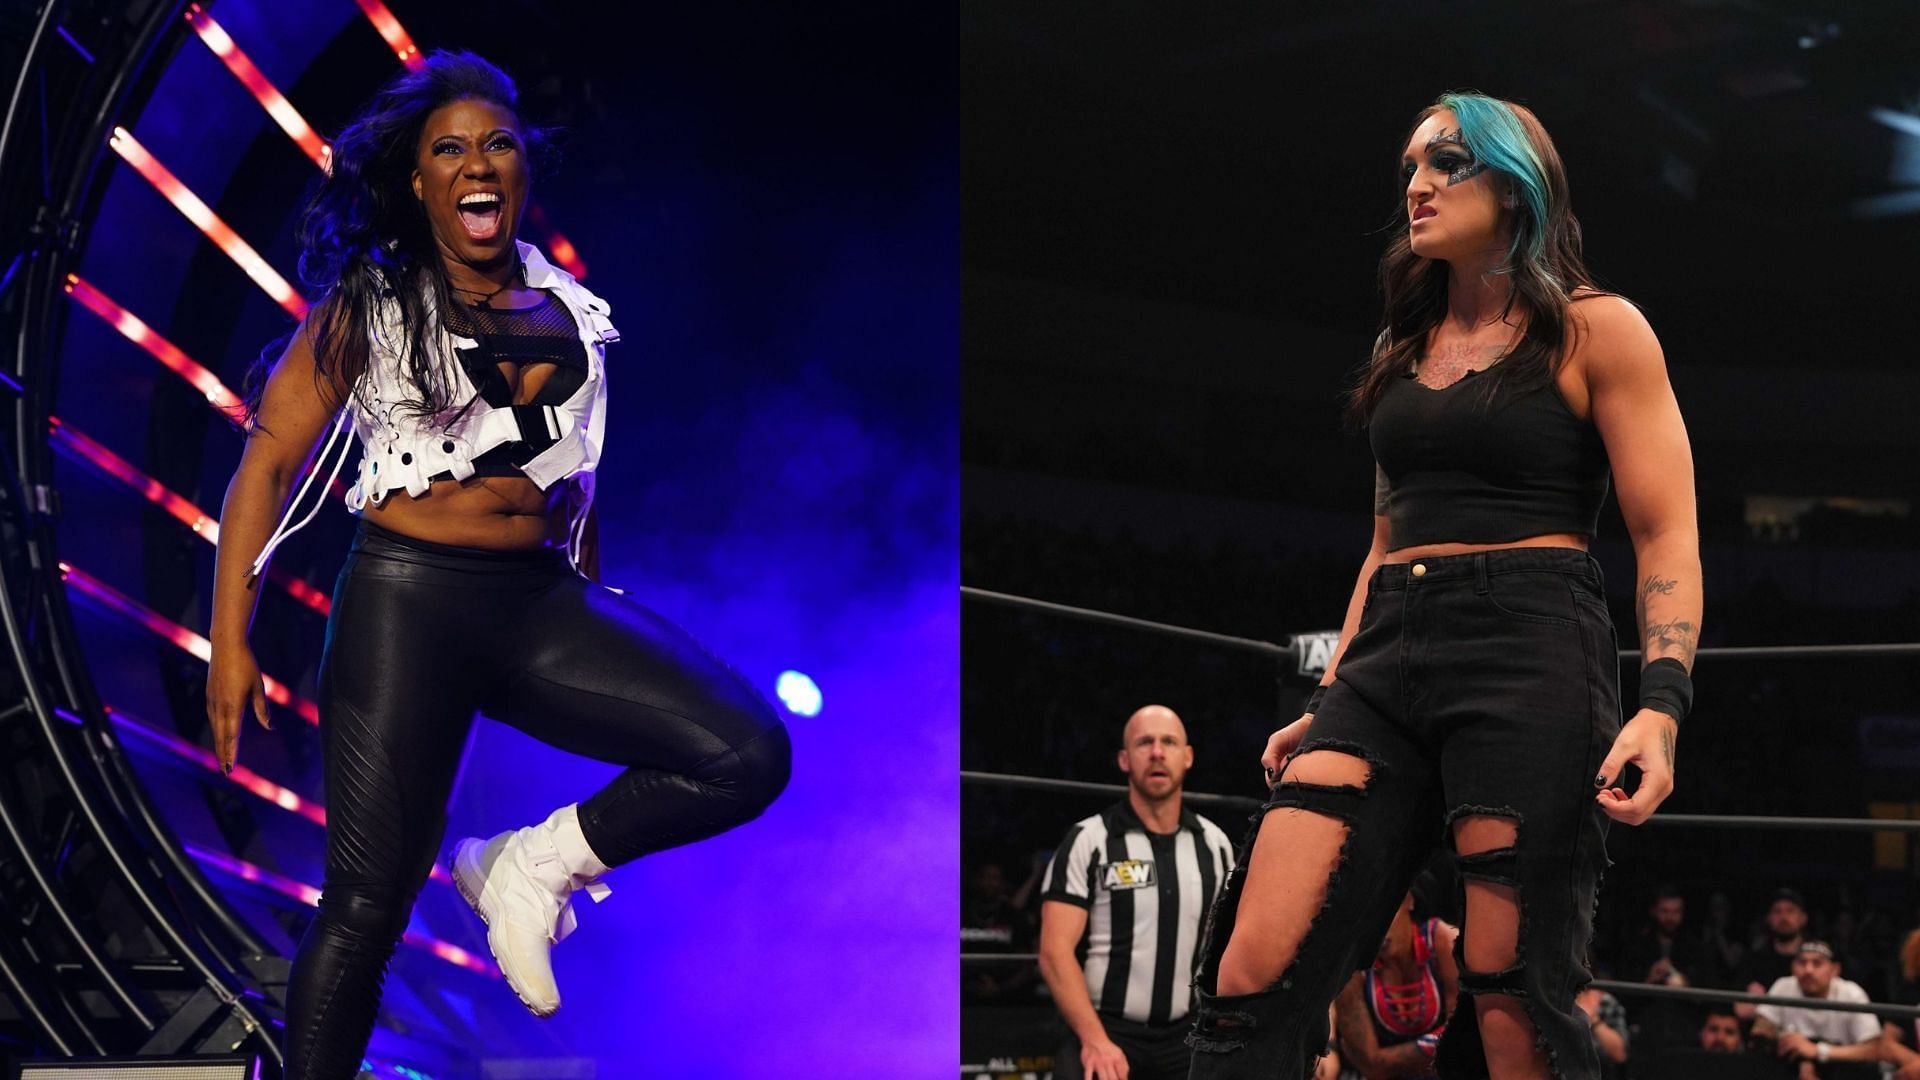 Athena and Kris Statlander have been teaming up for weeks in AEW